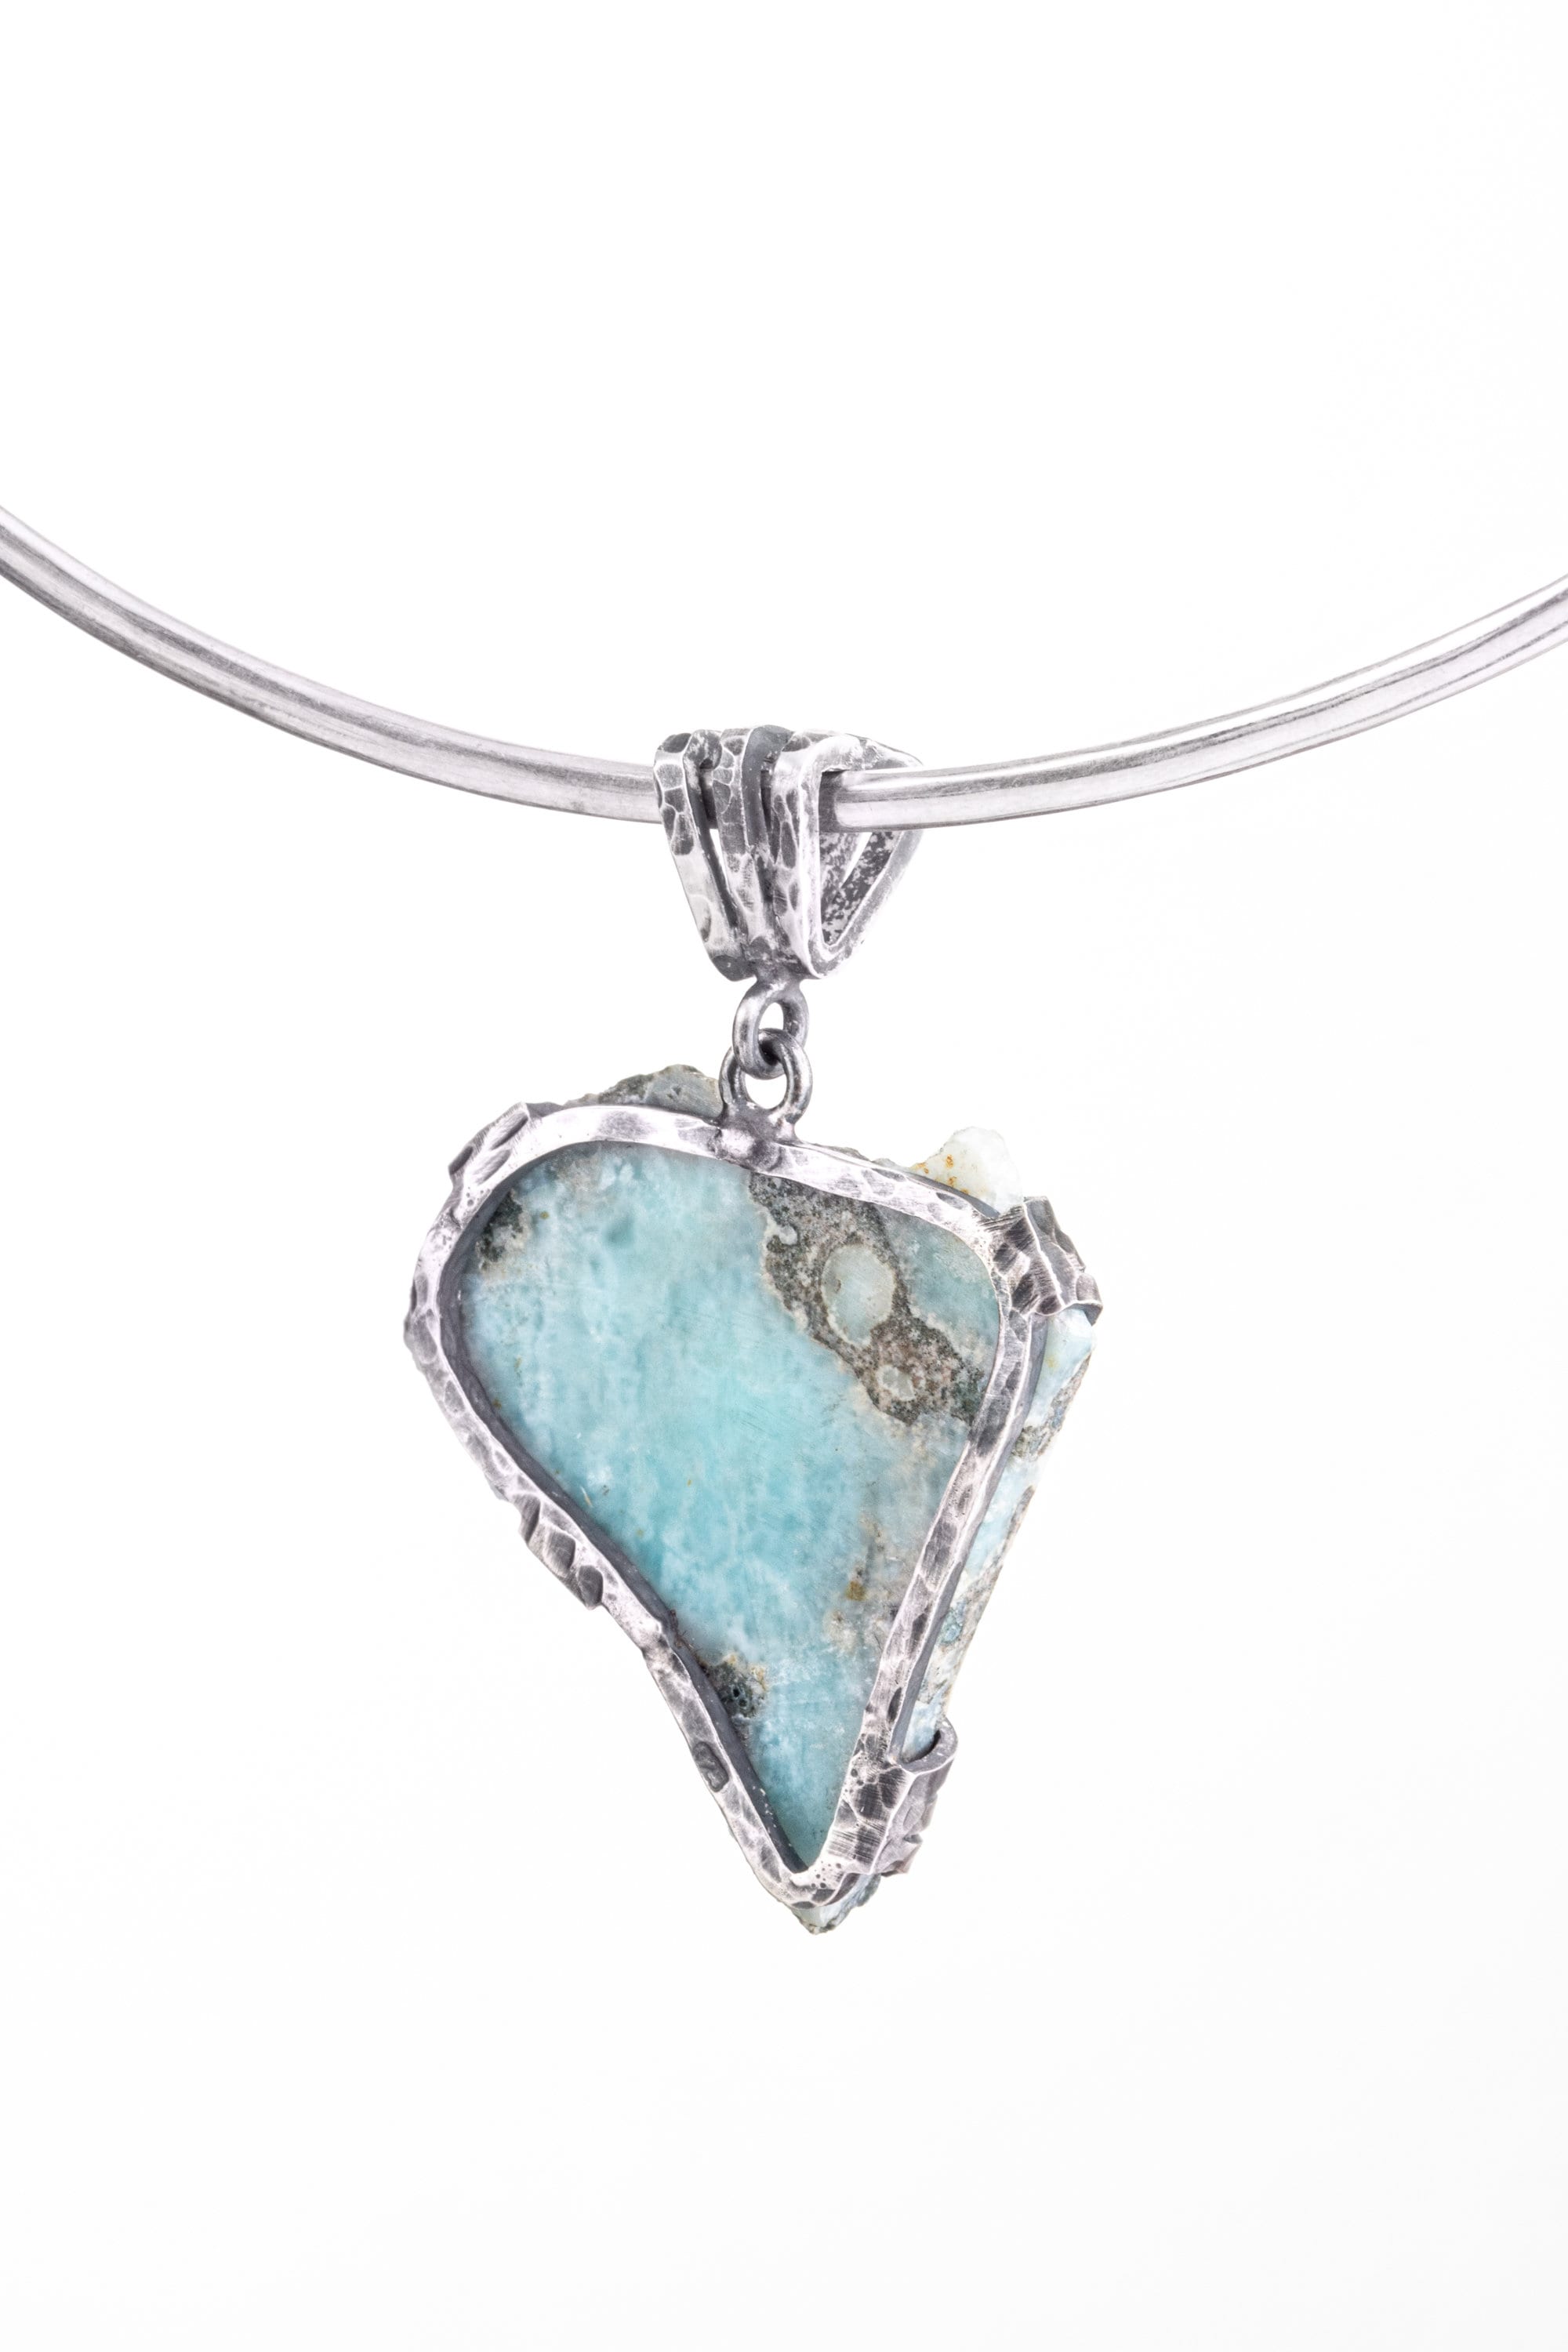 Large Natural unpolished Larimar - 925 Sterling Silver - Hammered & Oxidised - Three Claw Wire Setting - Pendant Neckpiece N/11